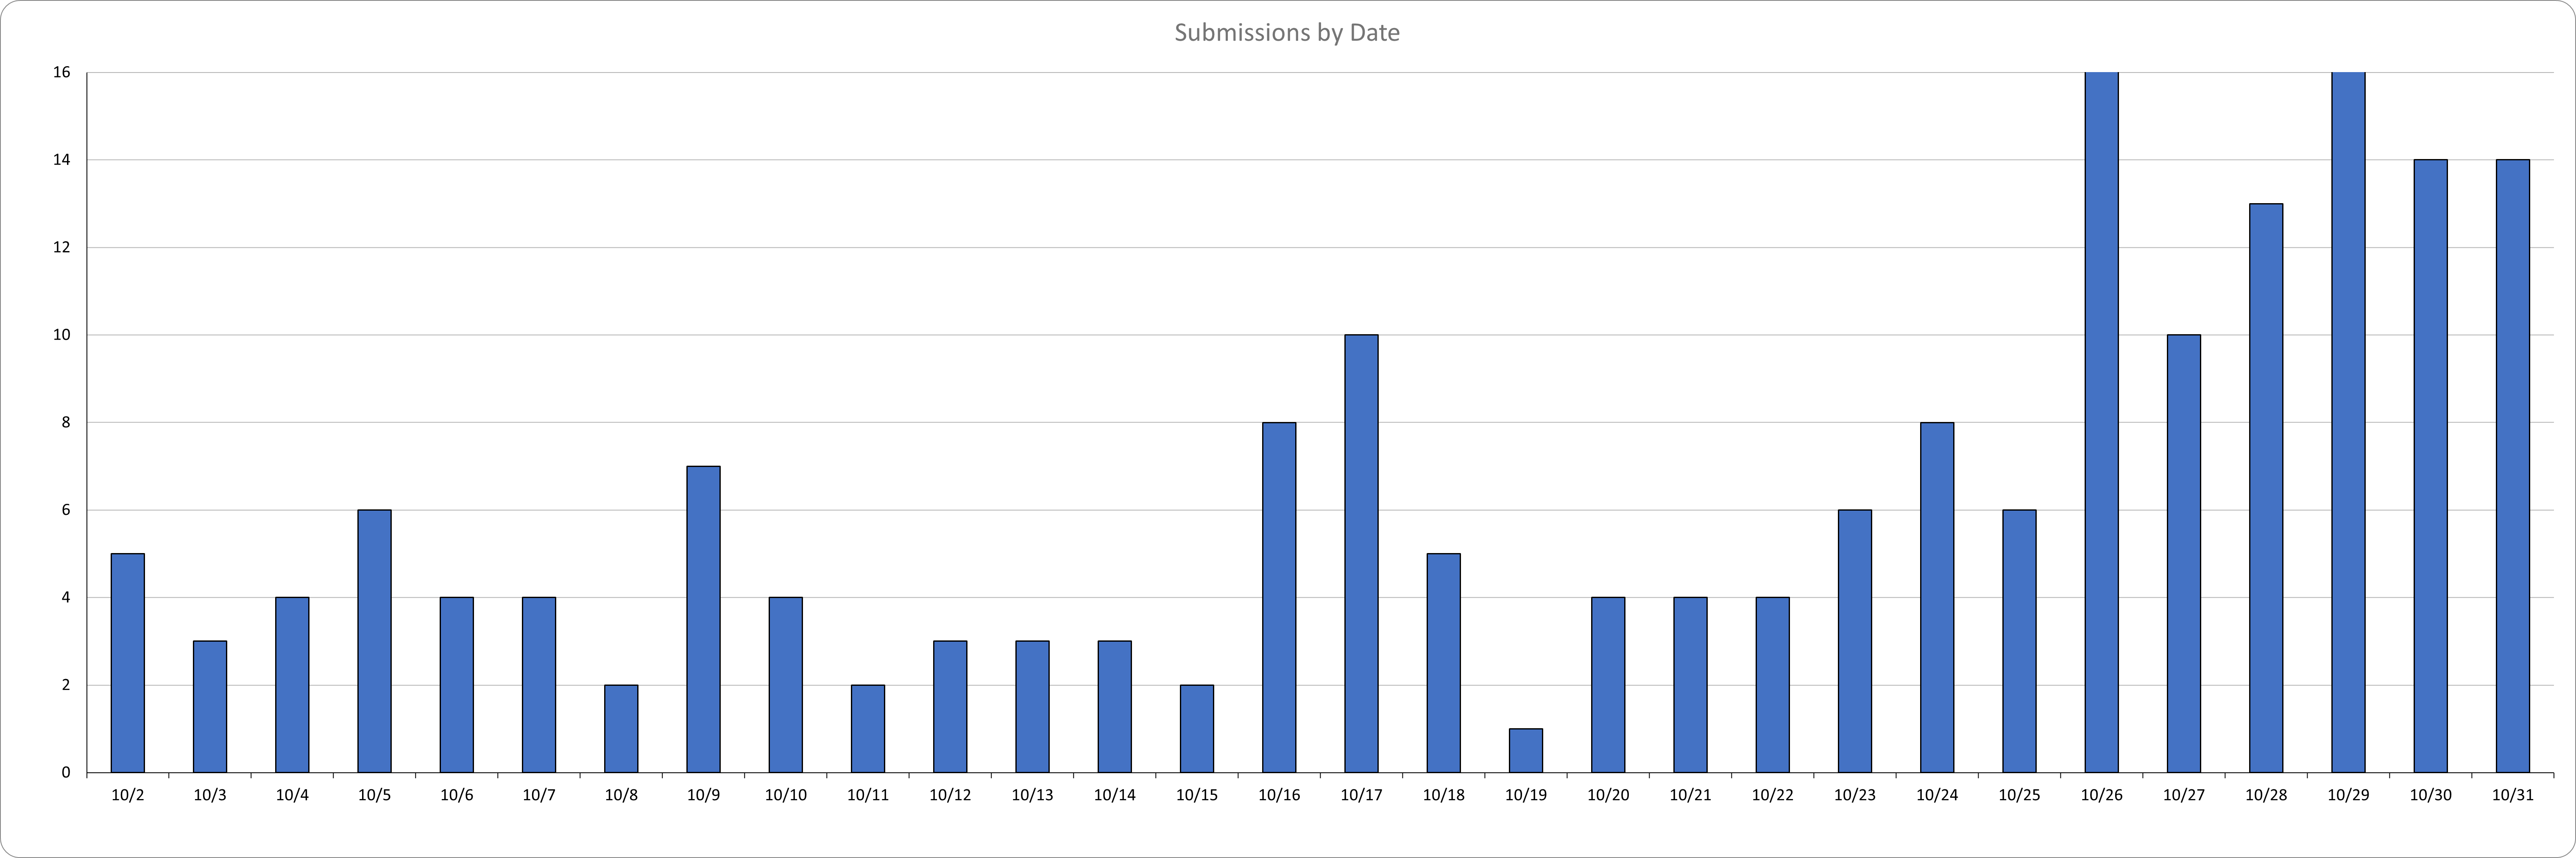 Submissions by Date